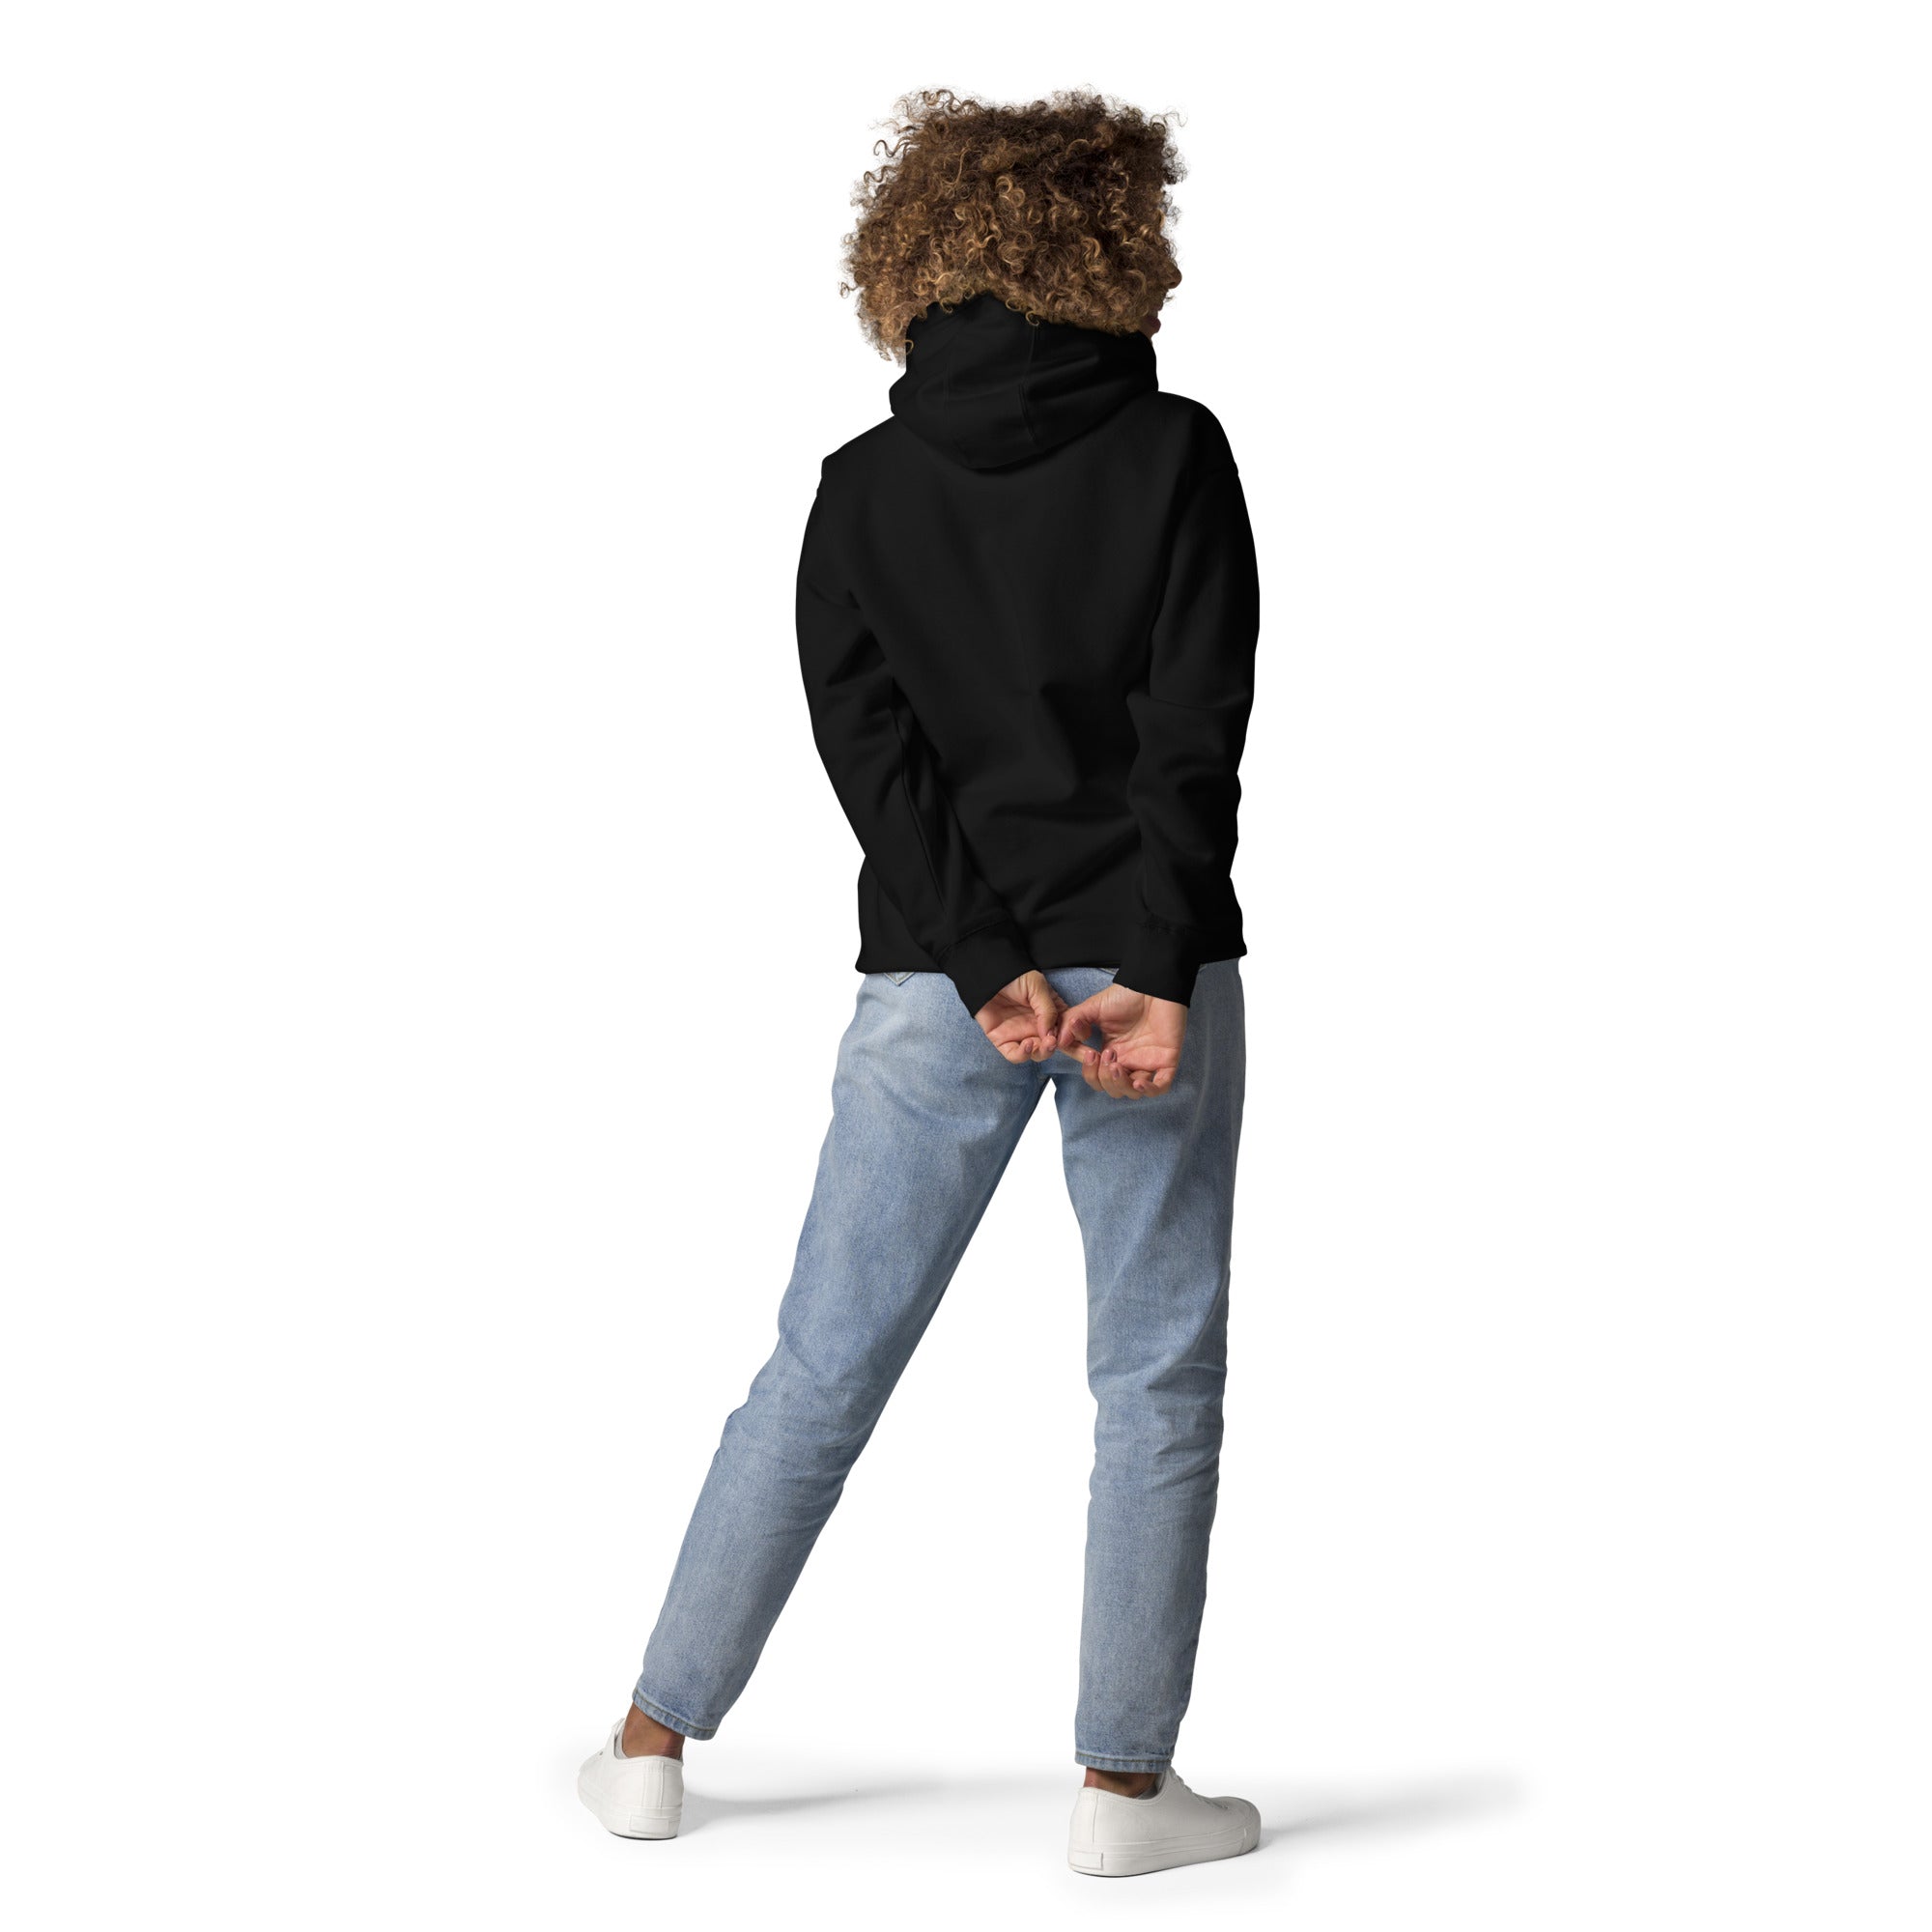 Chief Swagger Officer – Unisex Hoodie